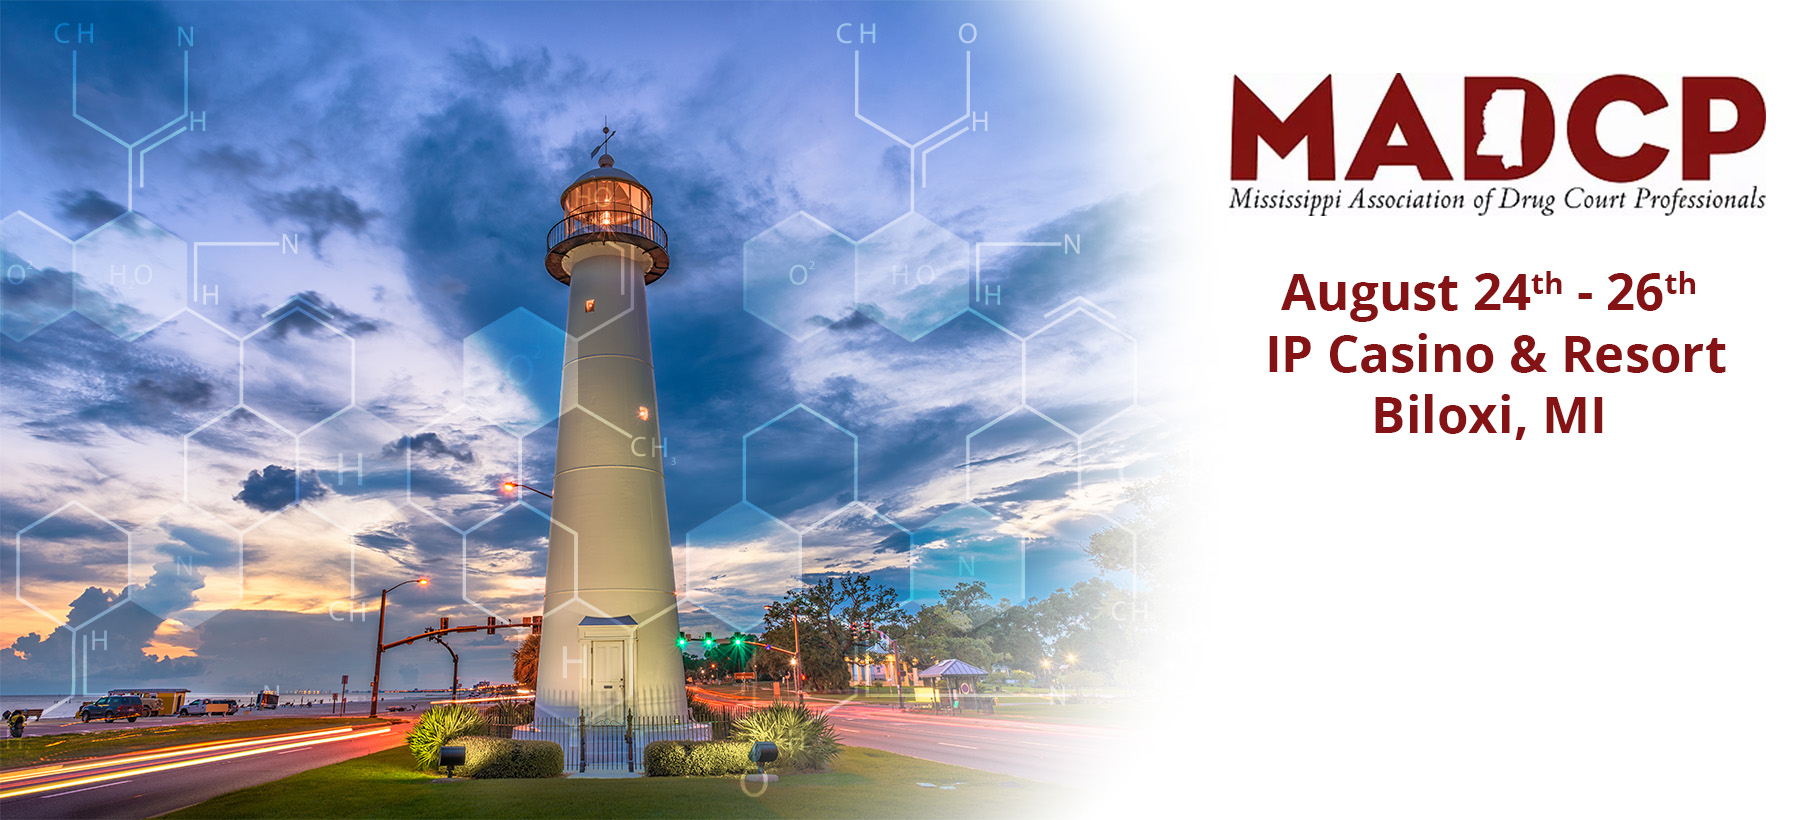 Visit DTPM at booth 76 at the MAFP Annual Scientific Symposium on July 16th - 20th 2022